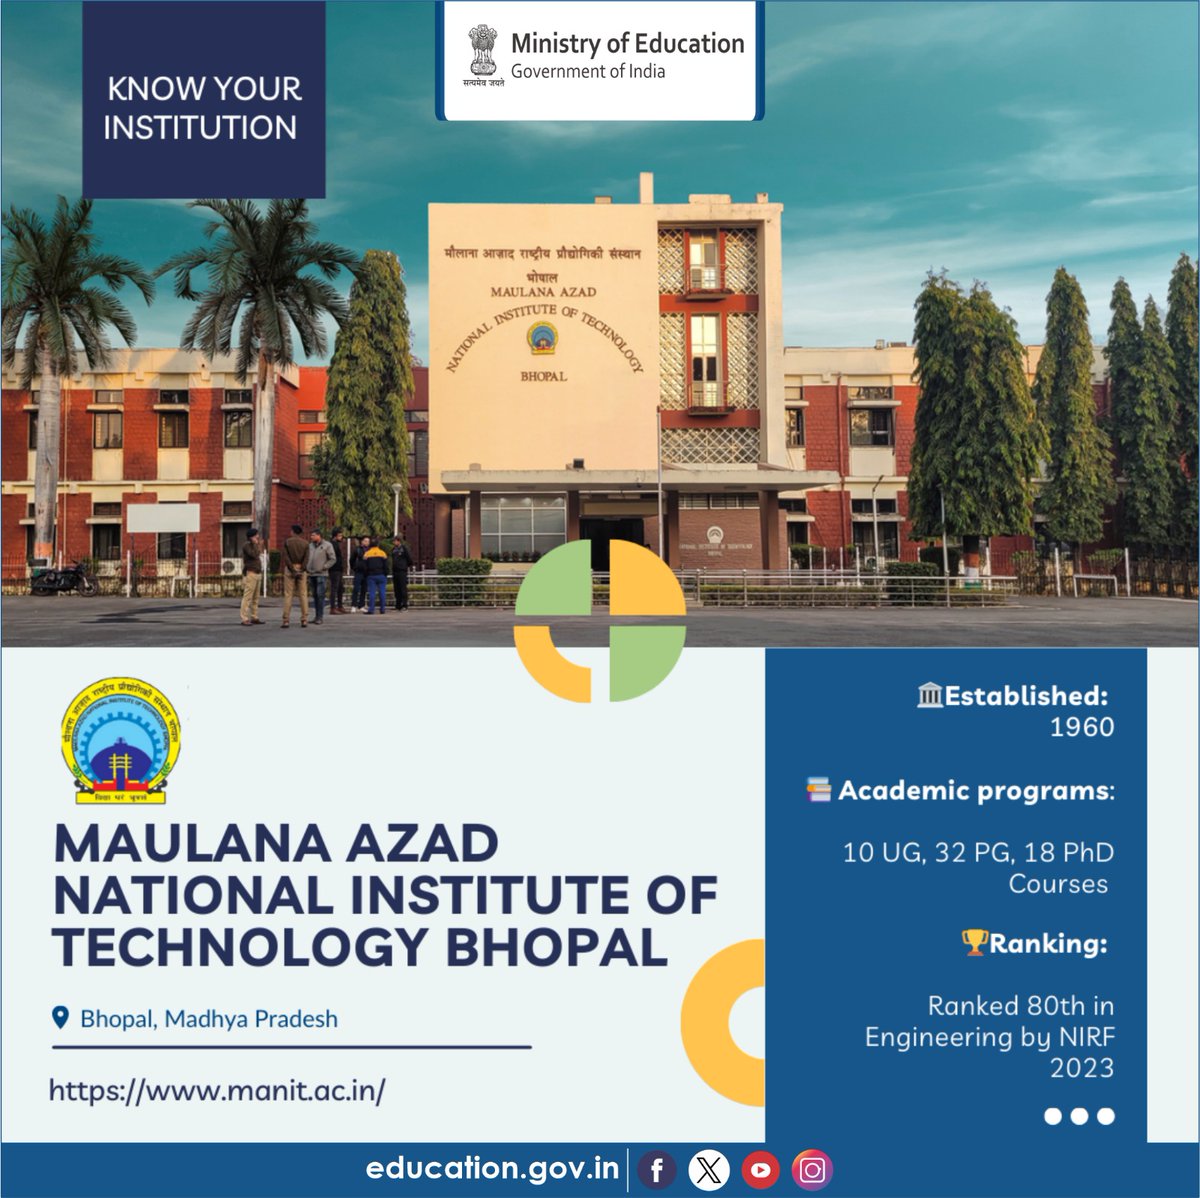 Know about the HEIs of India! Maulana Azad National Institute of Technology (MANIT) Bhopal was established in 1960, as one of the pioneering Regional Engineering Colleges (RECs). Over time, it became a top-tier institution, gaining recognition as an Institute of National…